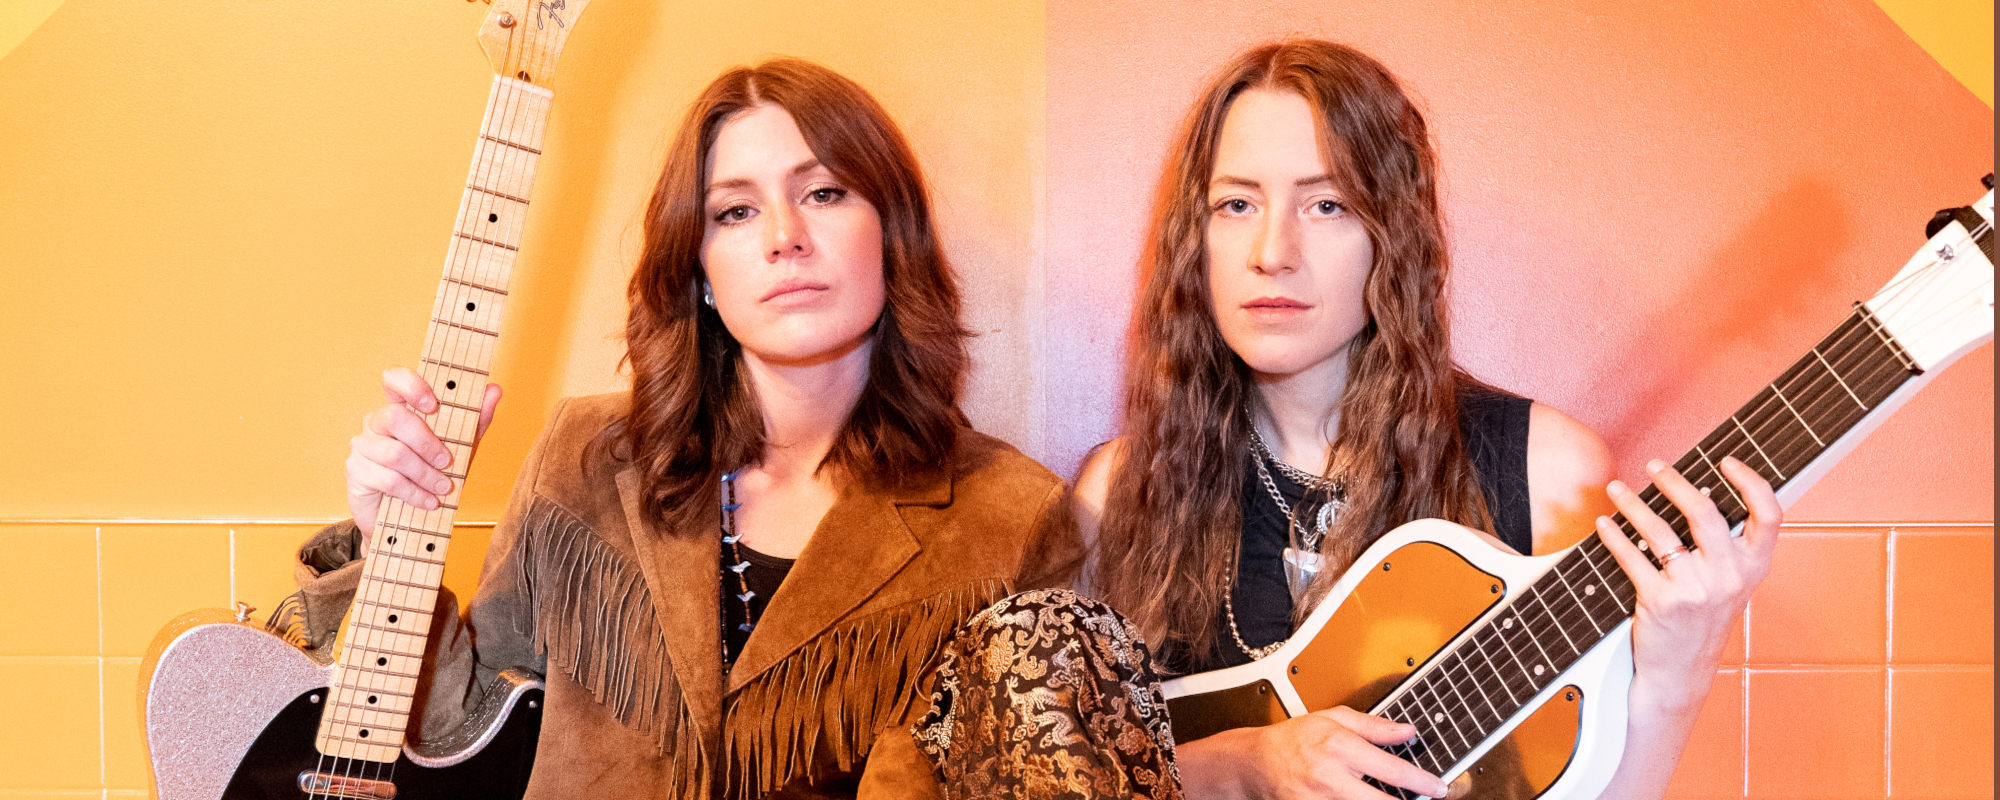 Review: Larkin Poe Deliver Roaring, Impassioned Set on ‘Blood Harmony’